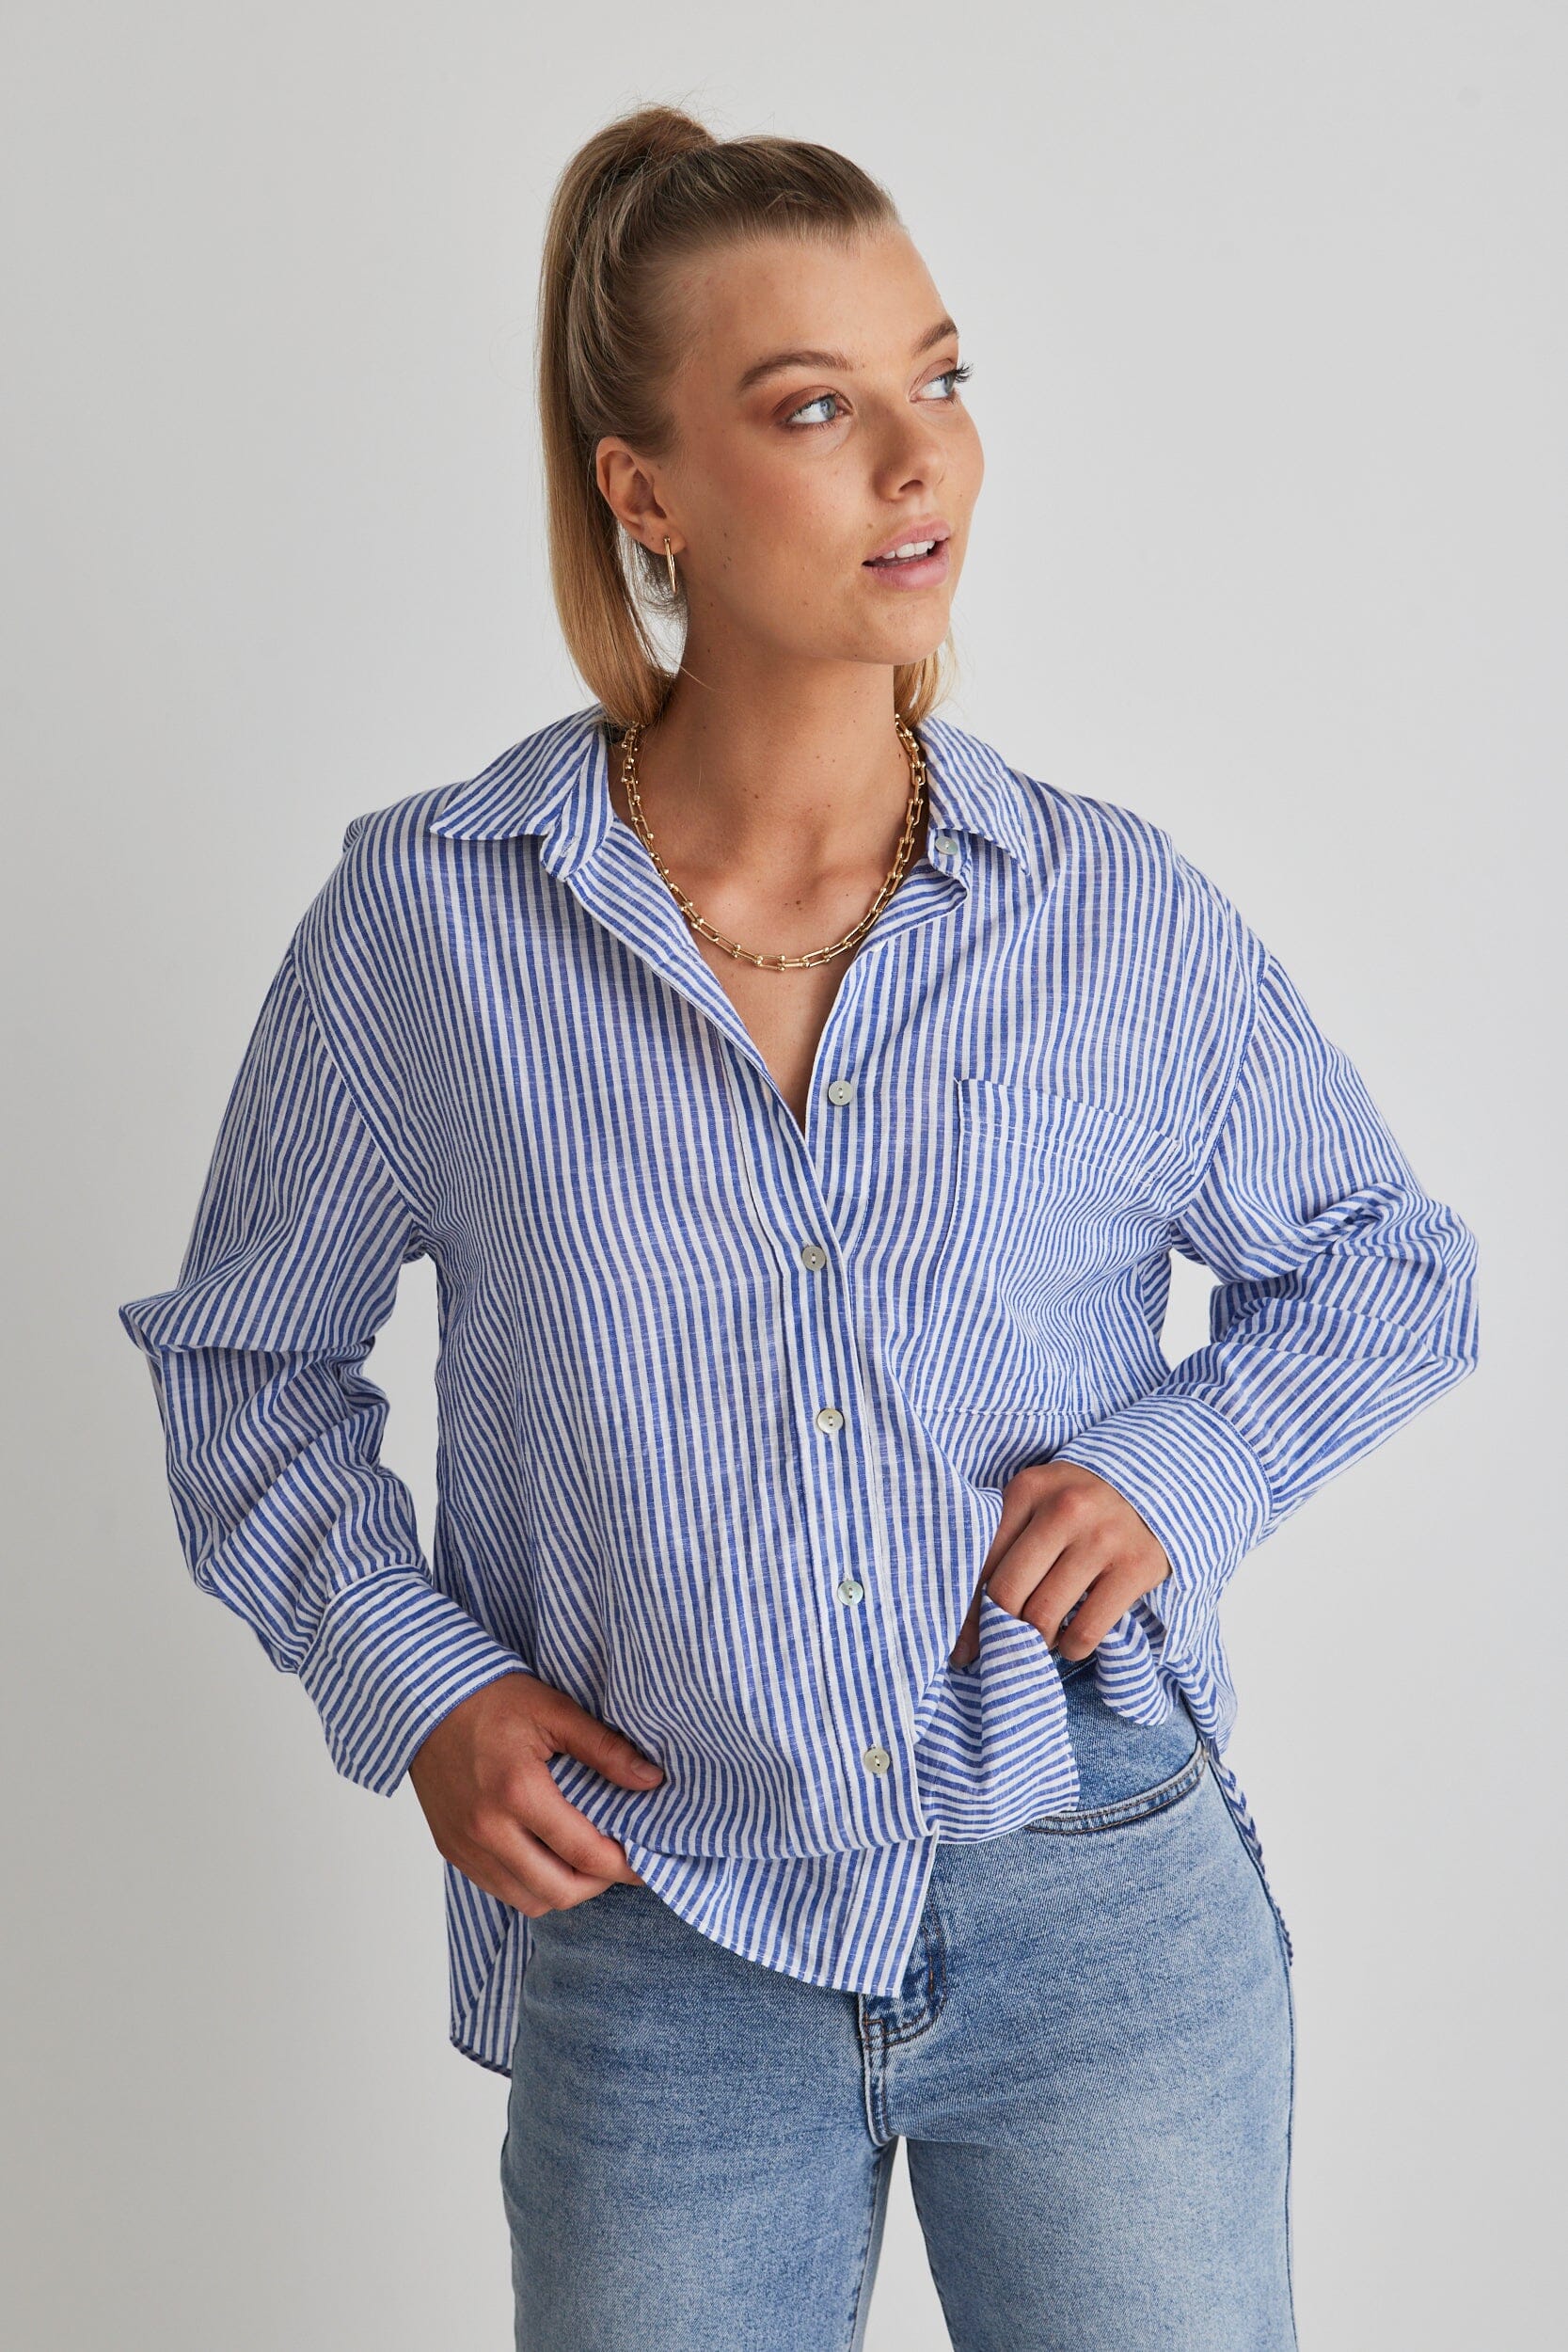 Stories Be Told - You Got This Shirt - Blue Stripe *** PRE ORDER / DUE APPROX 23FEB *** Womens Stories Be Told